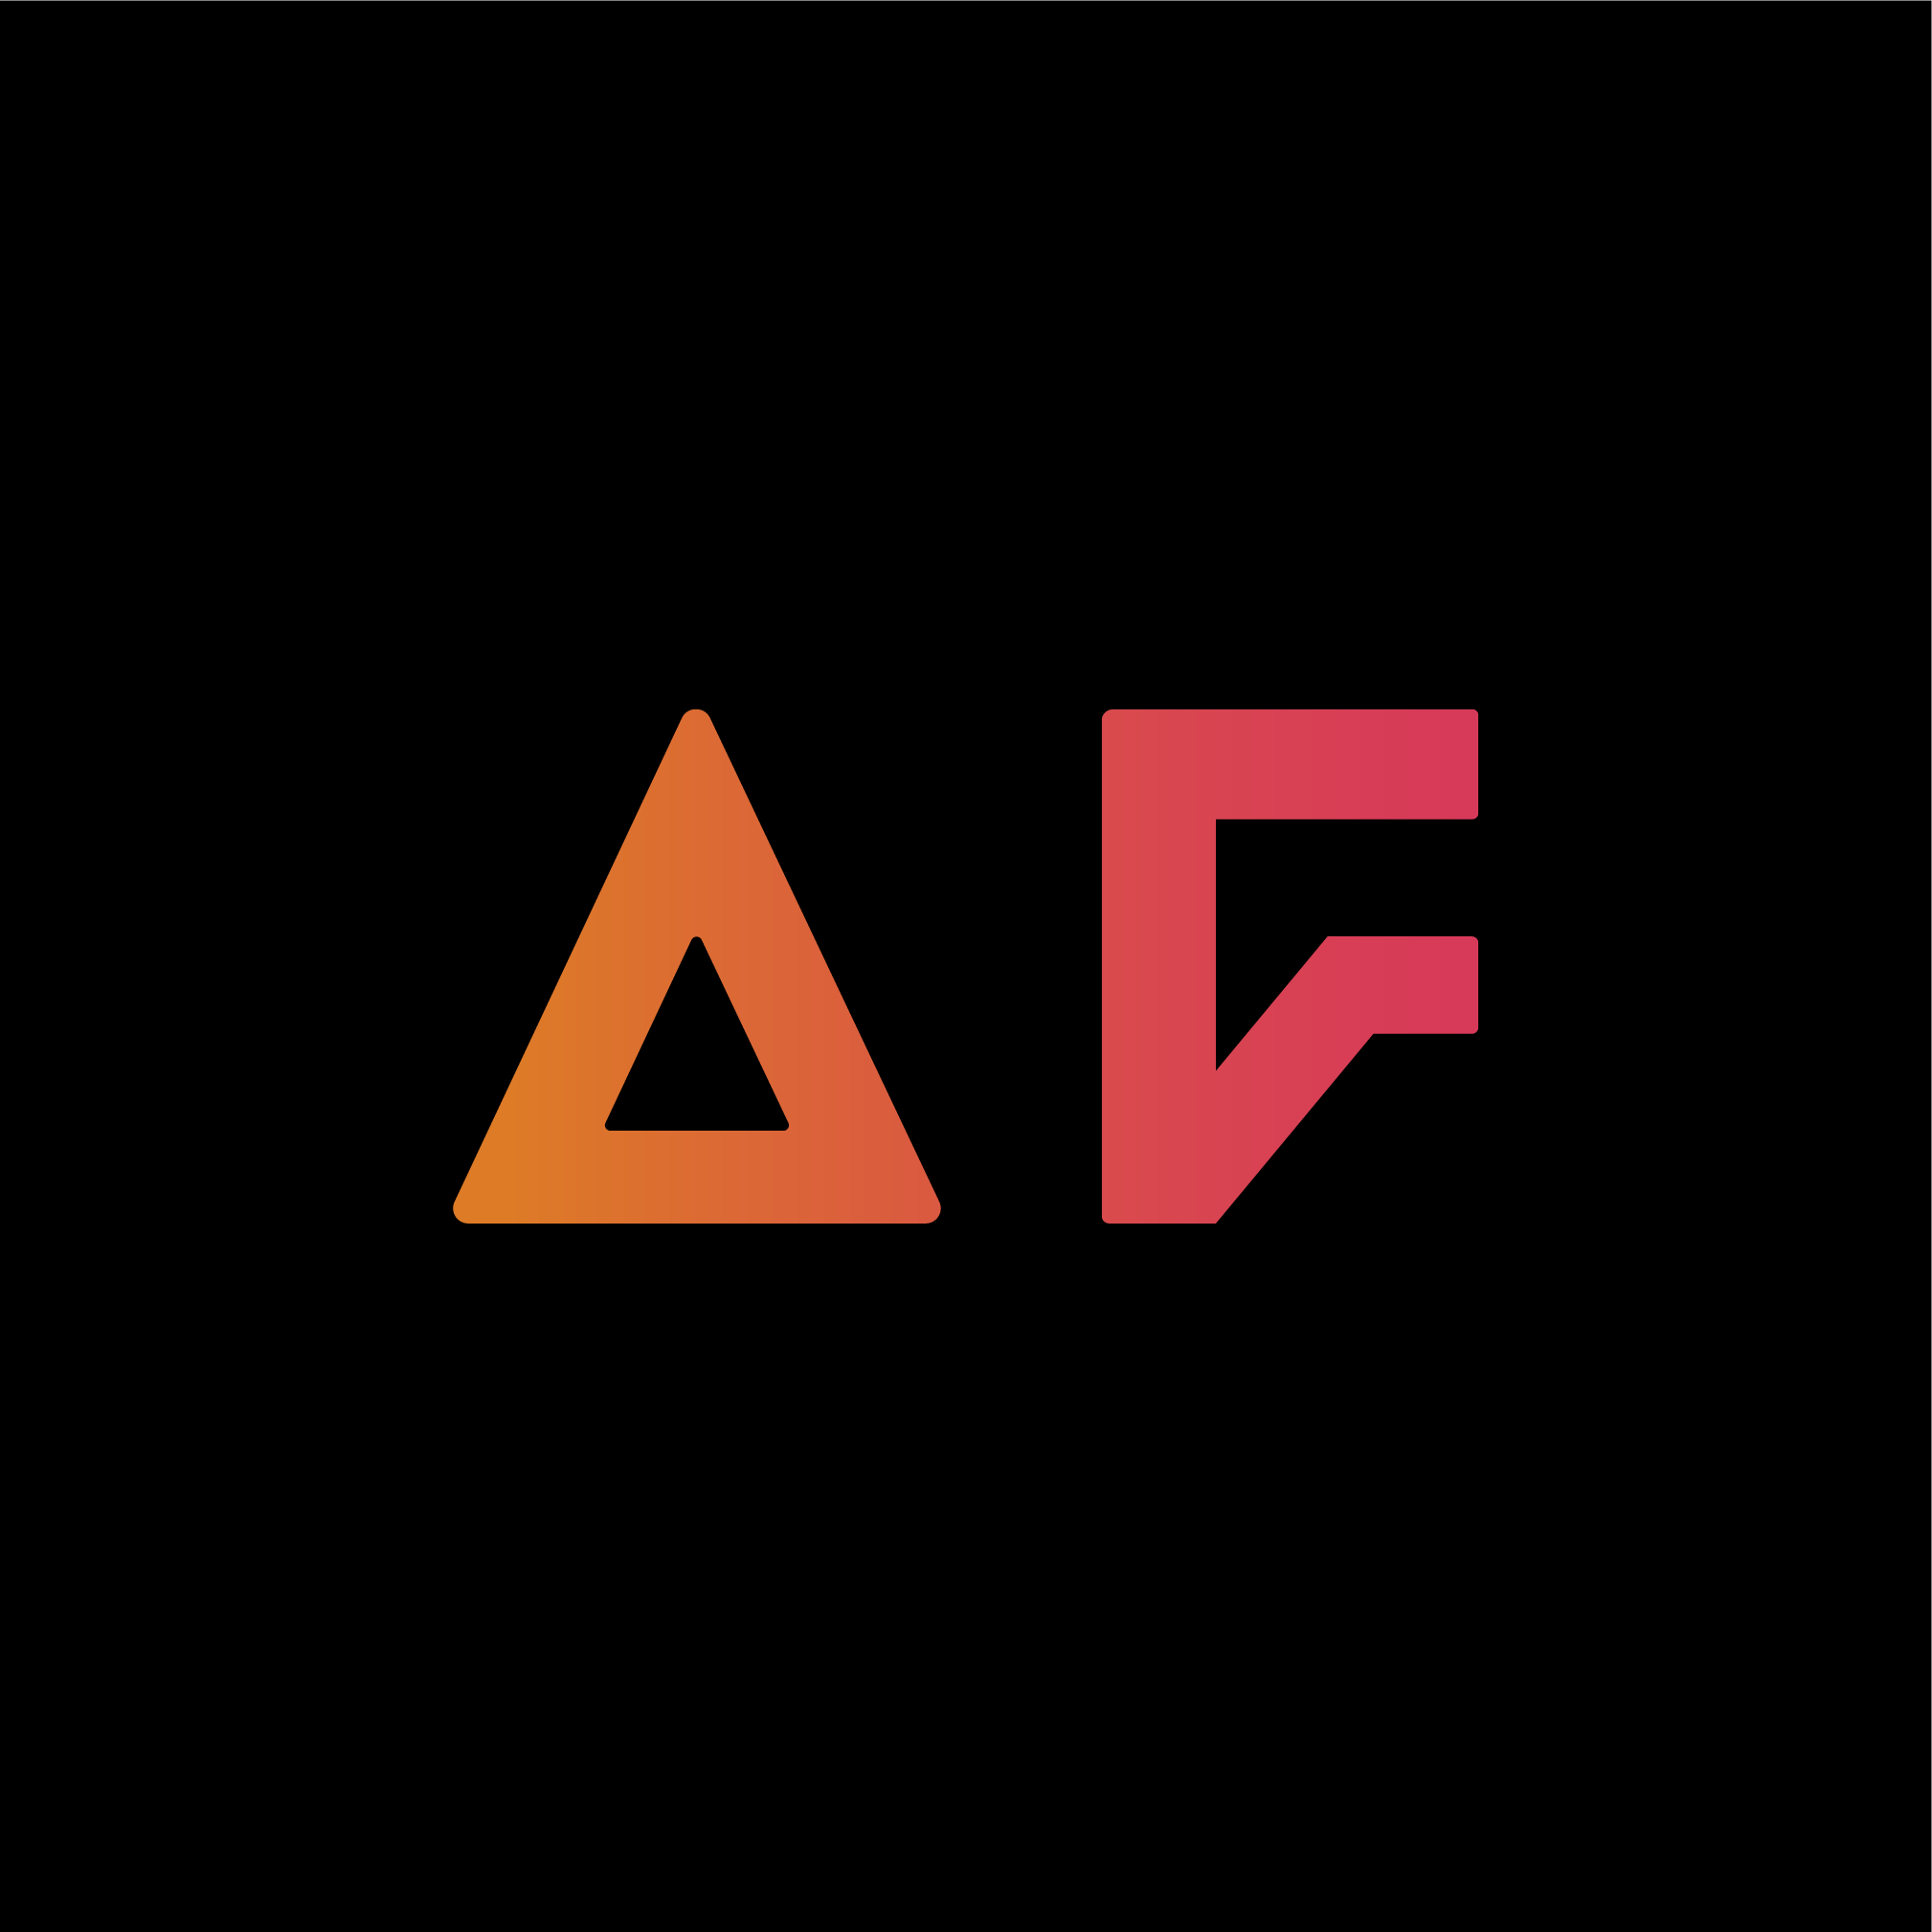 The Afternaut Group Private Limited company logo